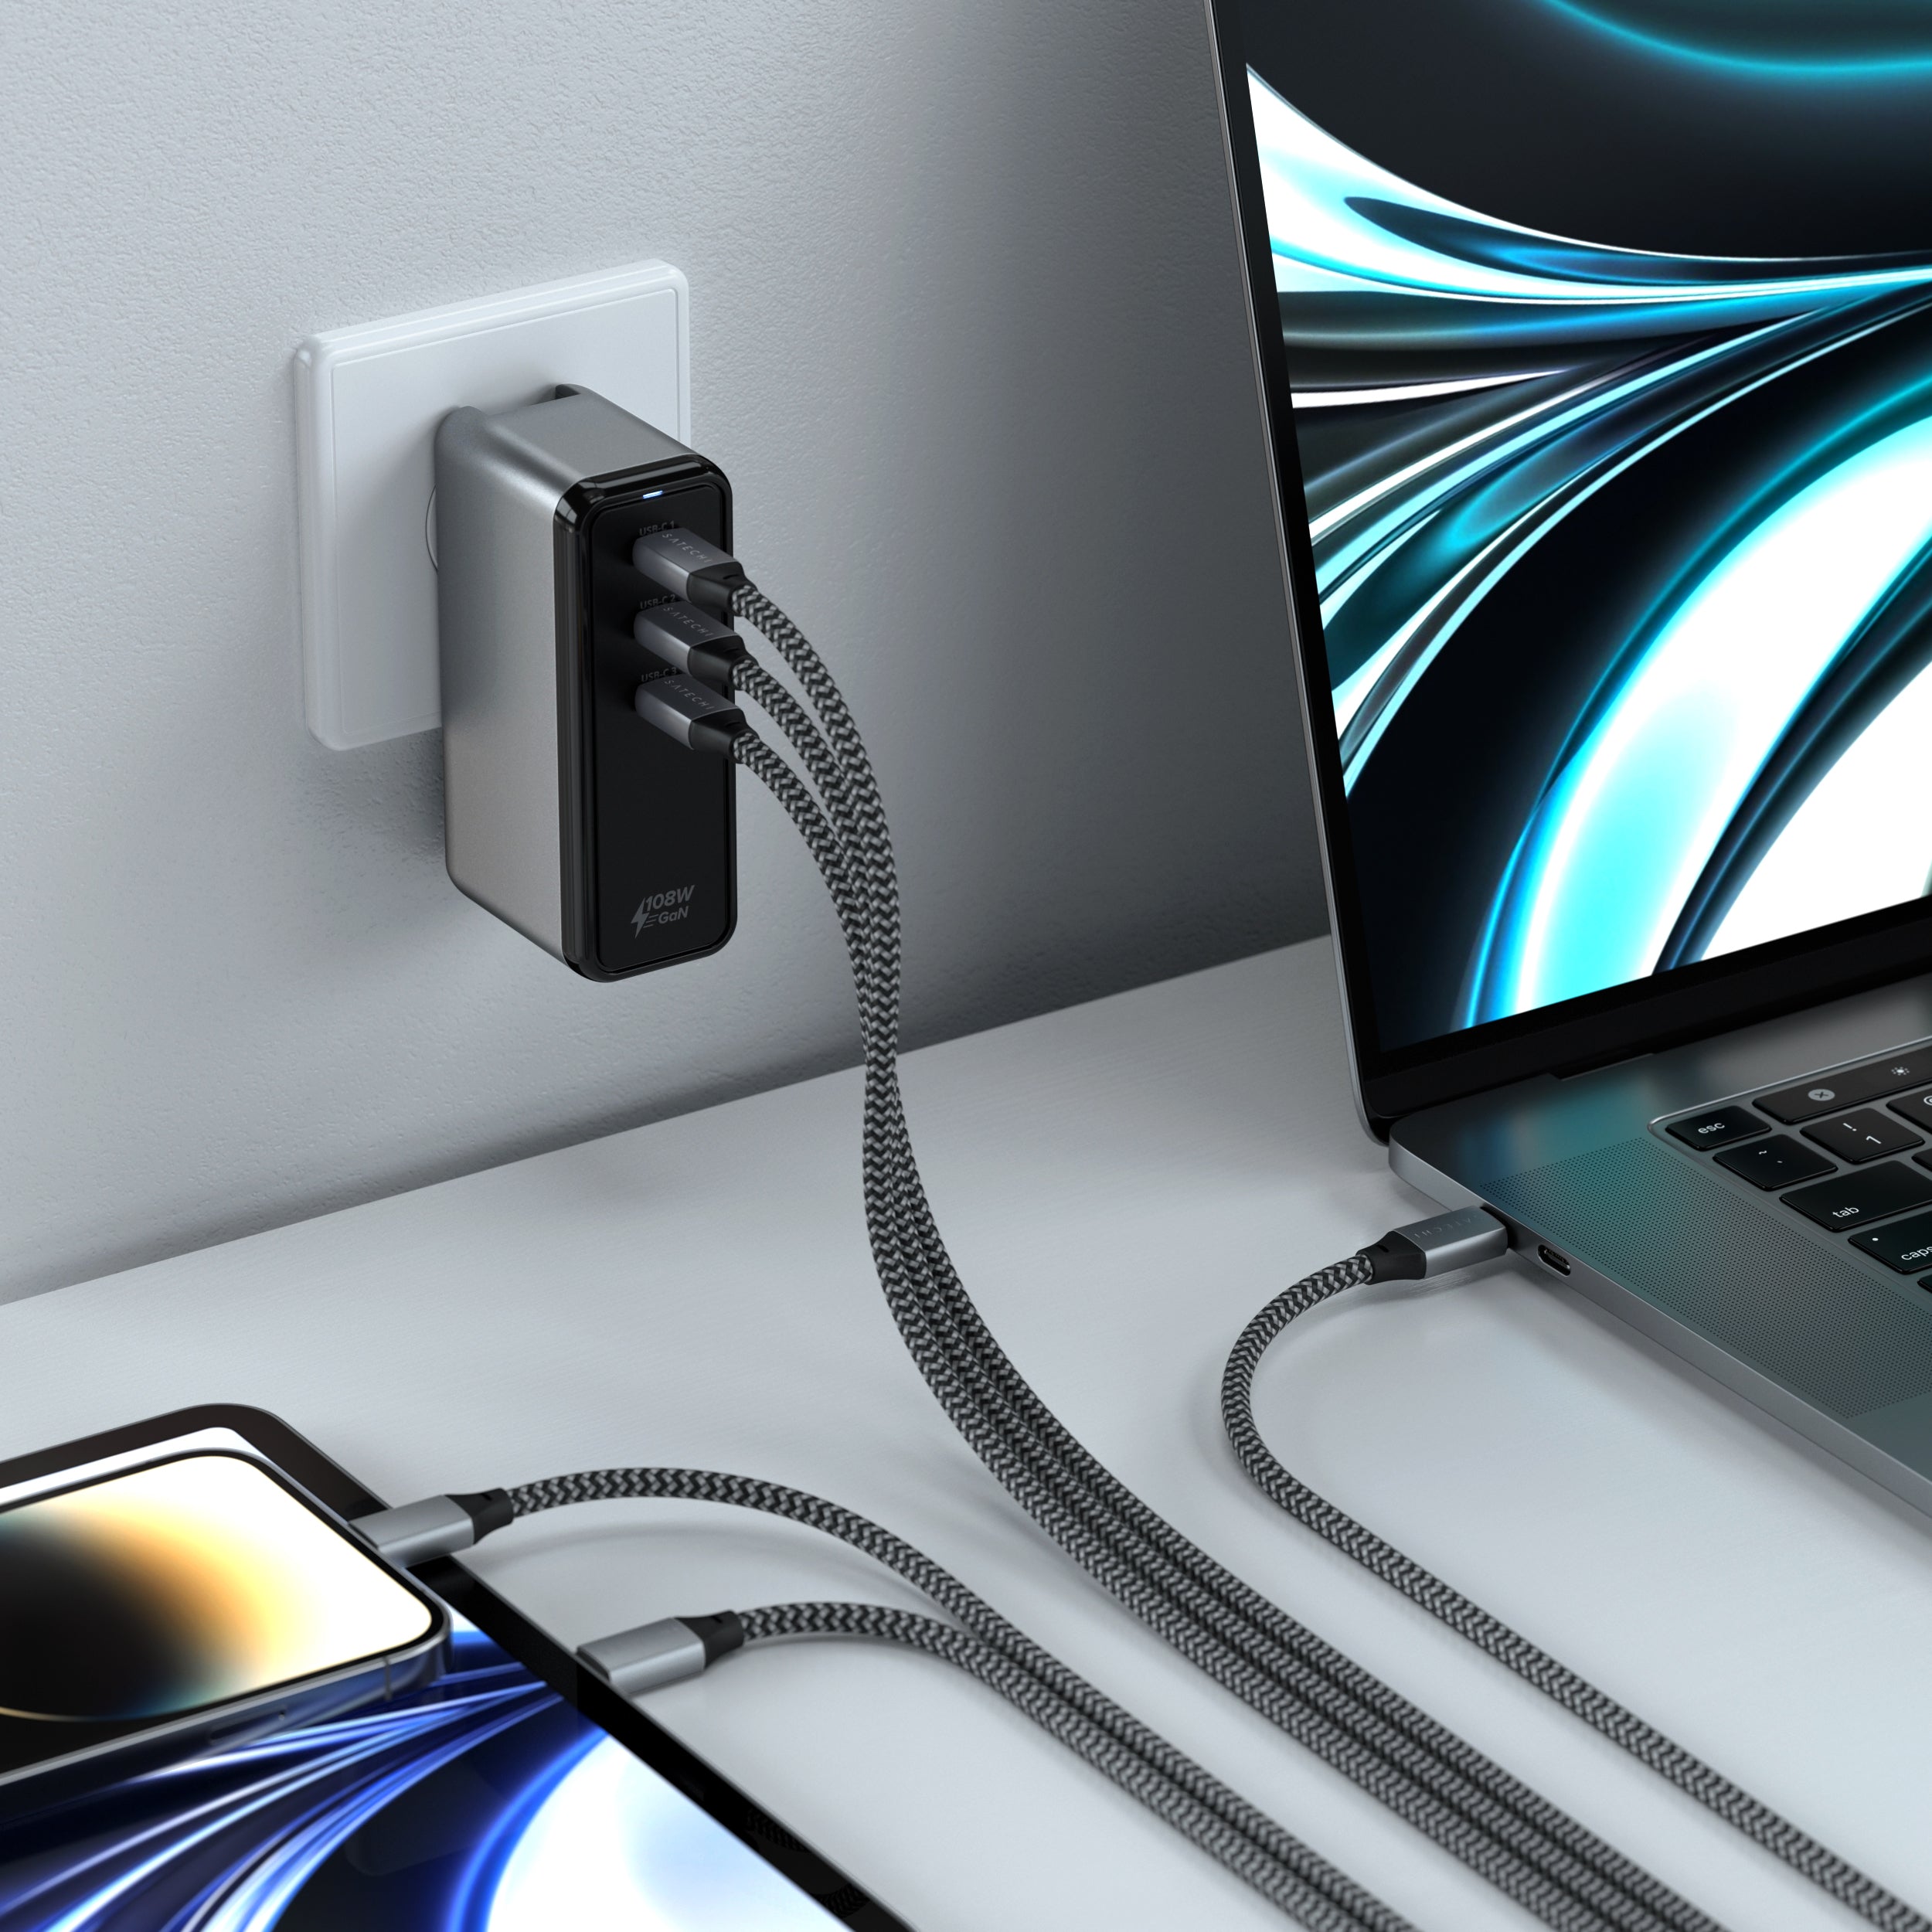 Supercharge your setup with the Satechi 108W USB-C 3-Port GaN Wall Charger, featuring Gallium Nitride (GaN) technology to power up to three devices simultaneously.